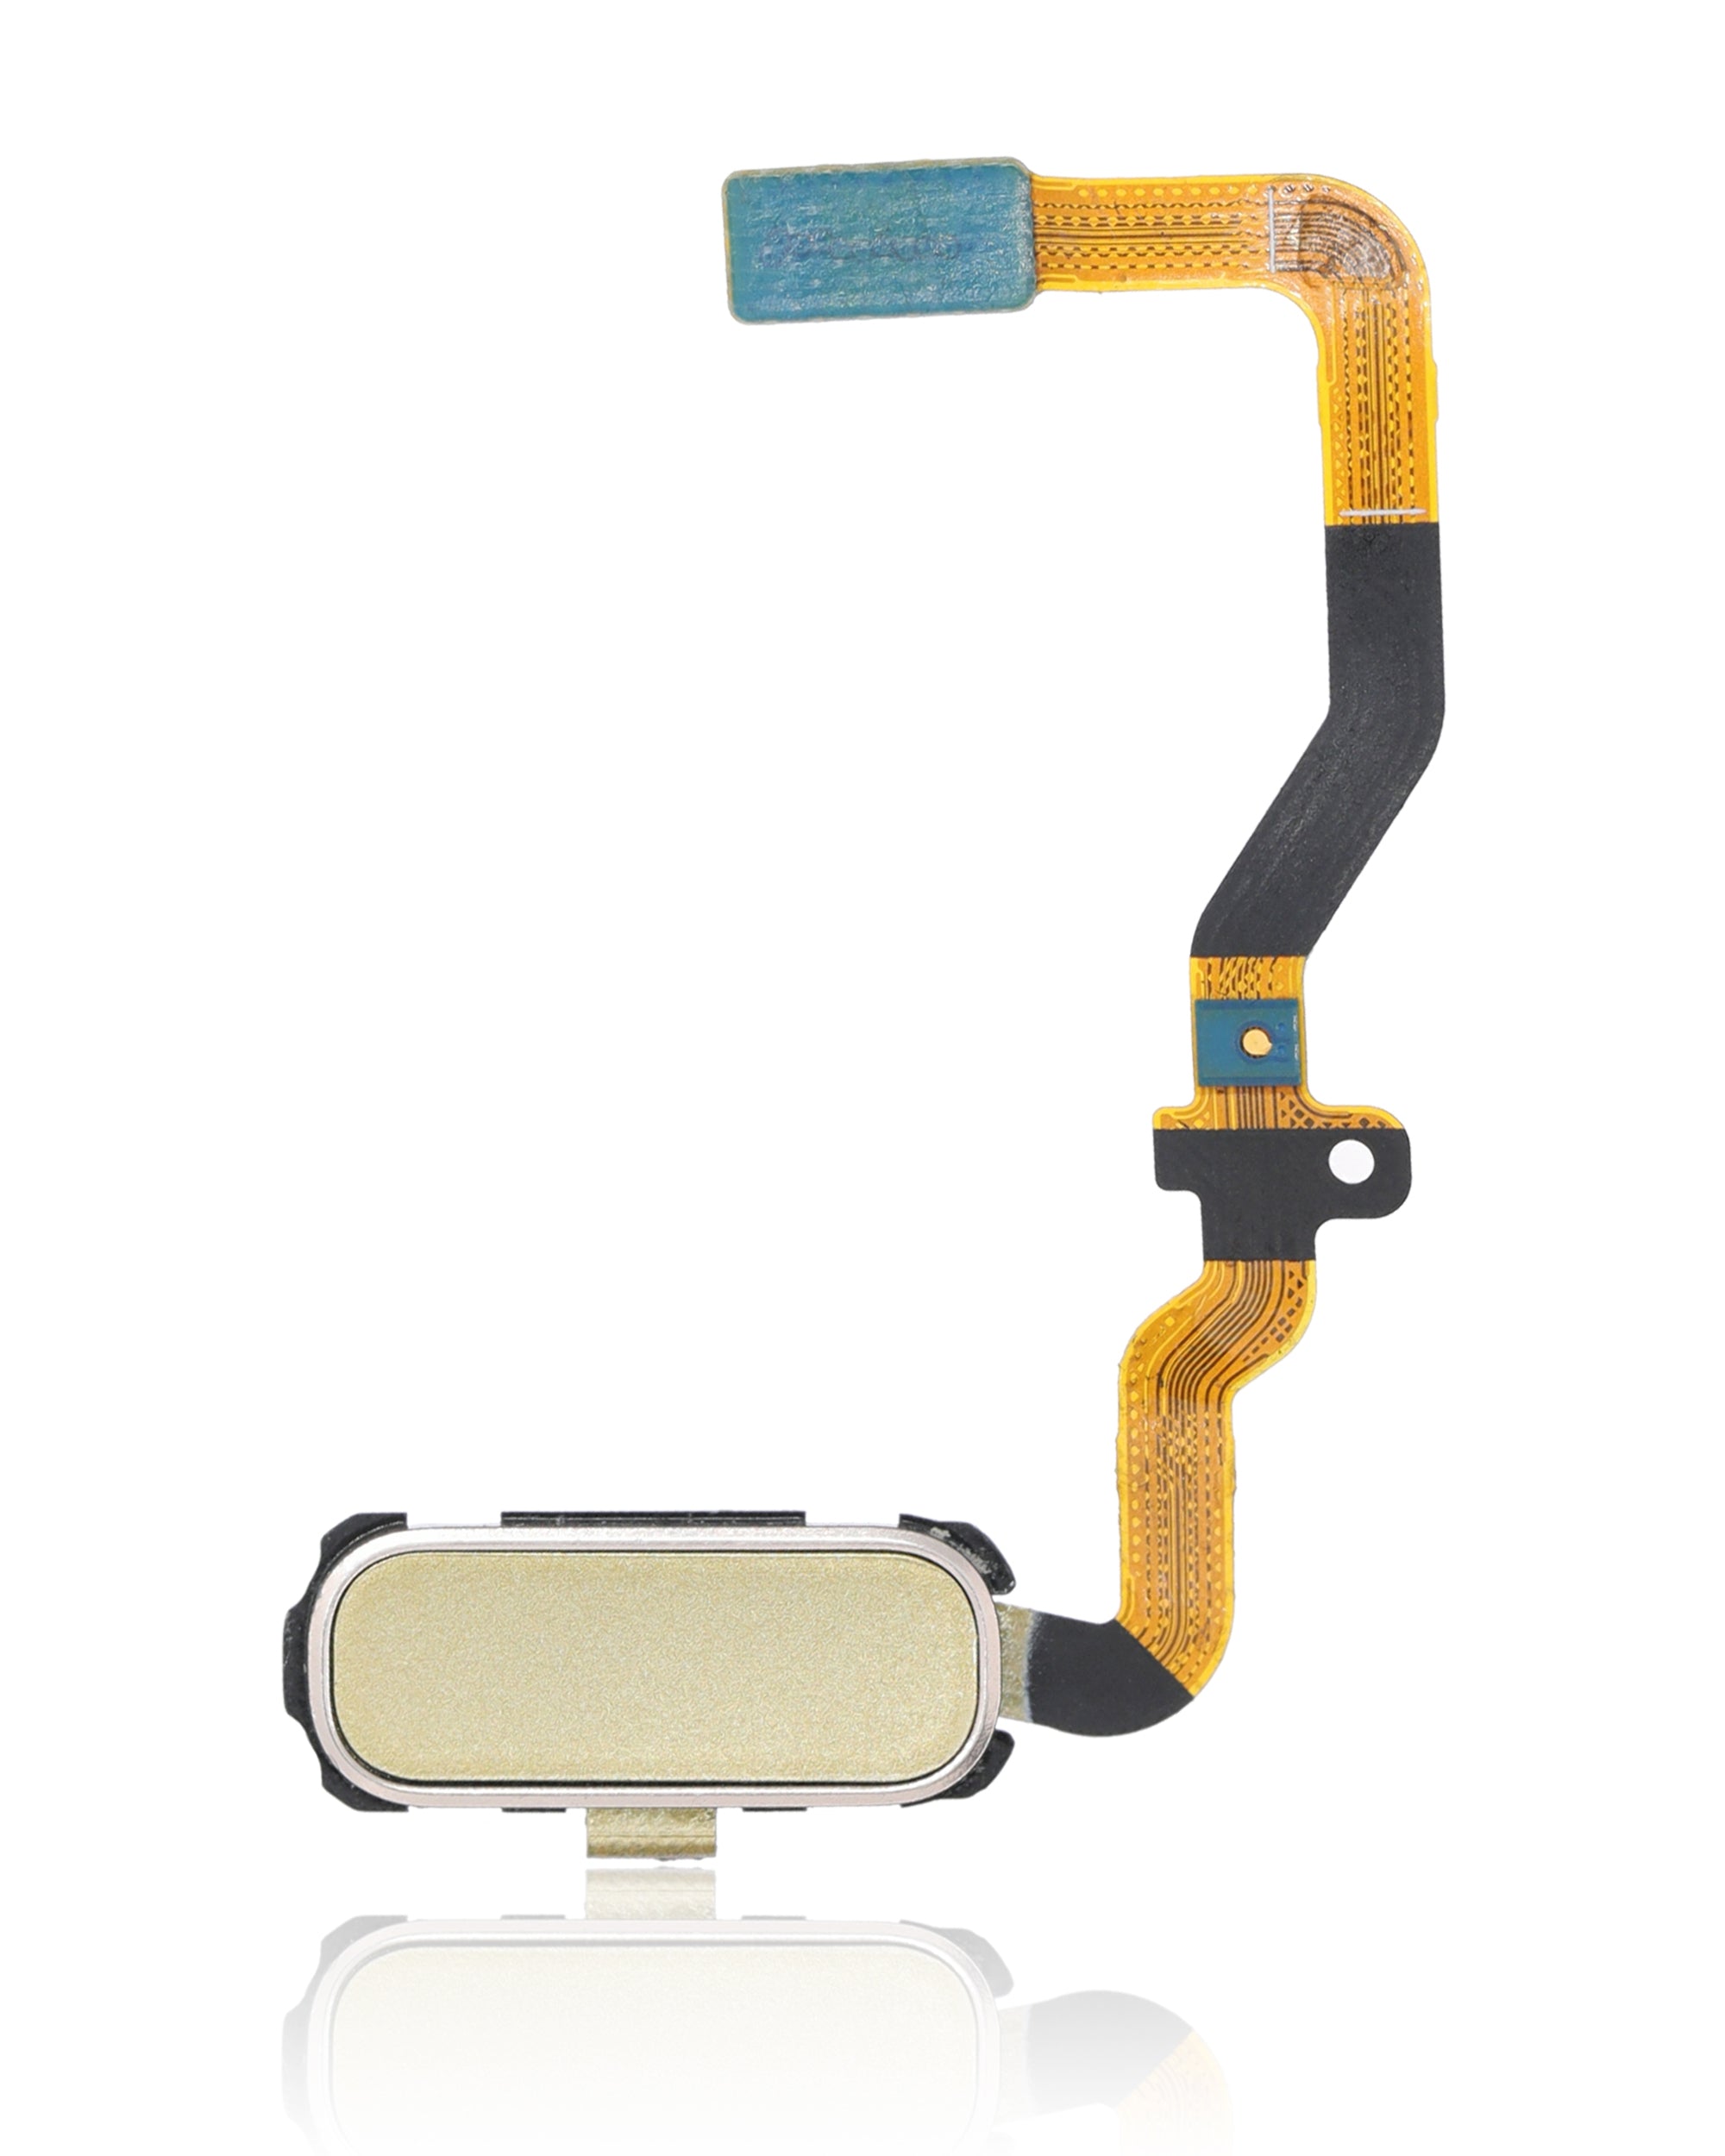 For Samsung Galaxy S7 Fingerprint Sensor With flex cable Replacement (All Colors)